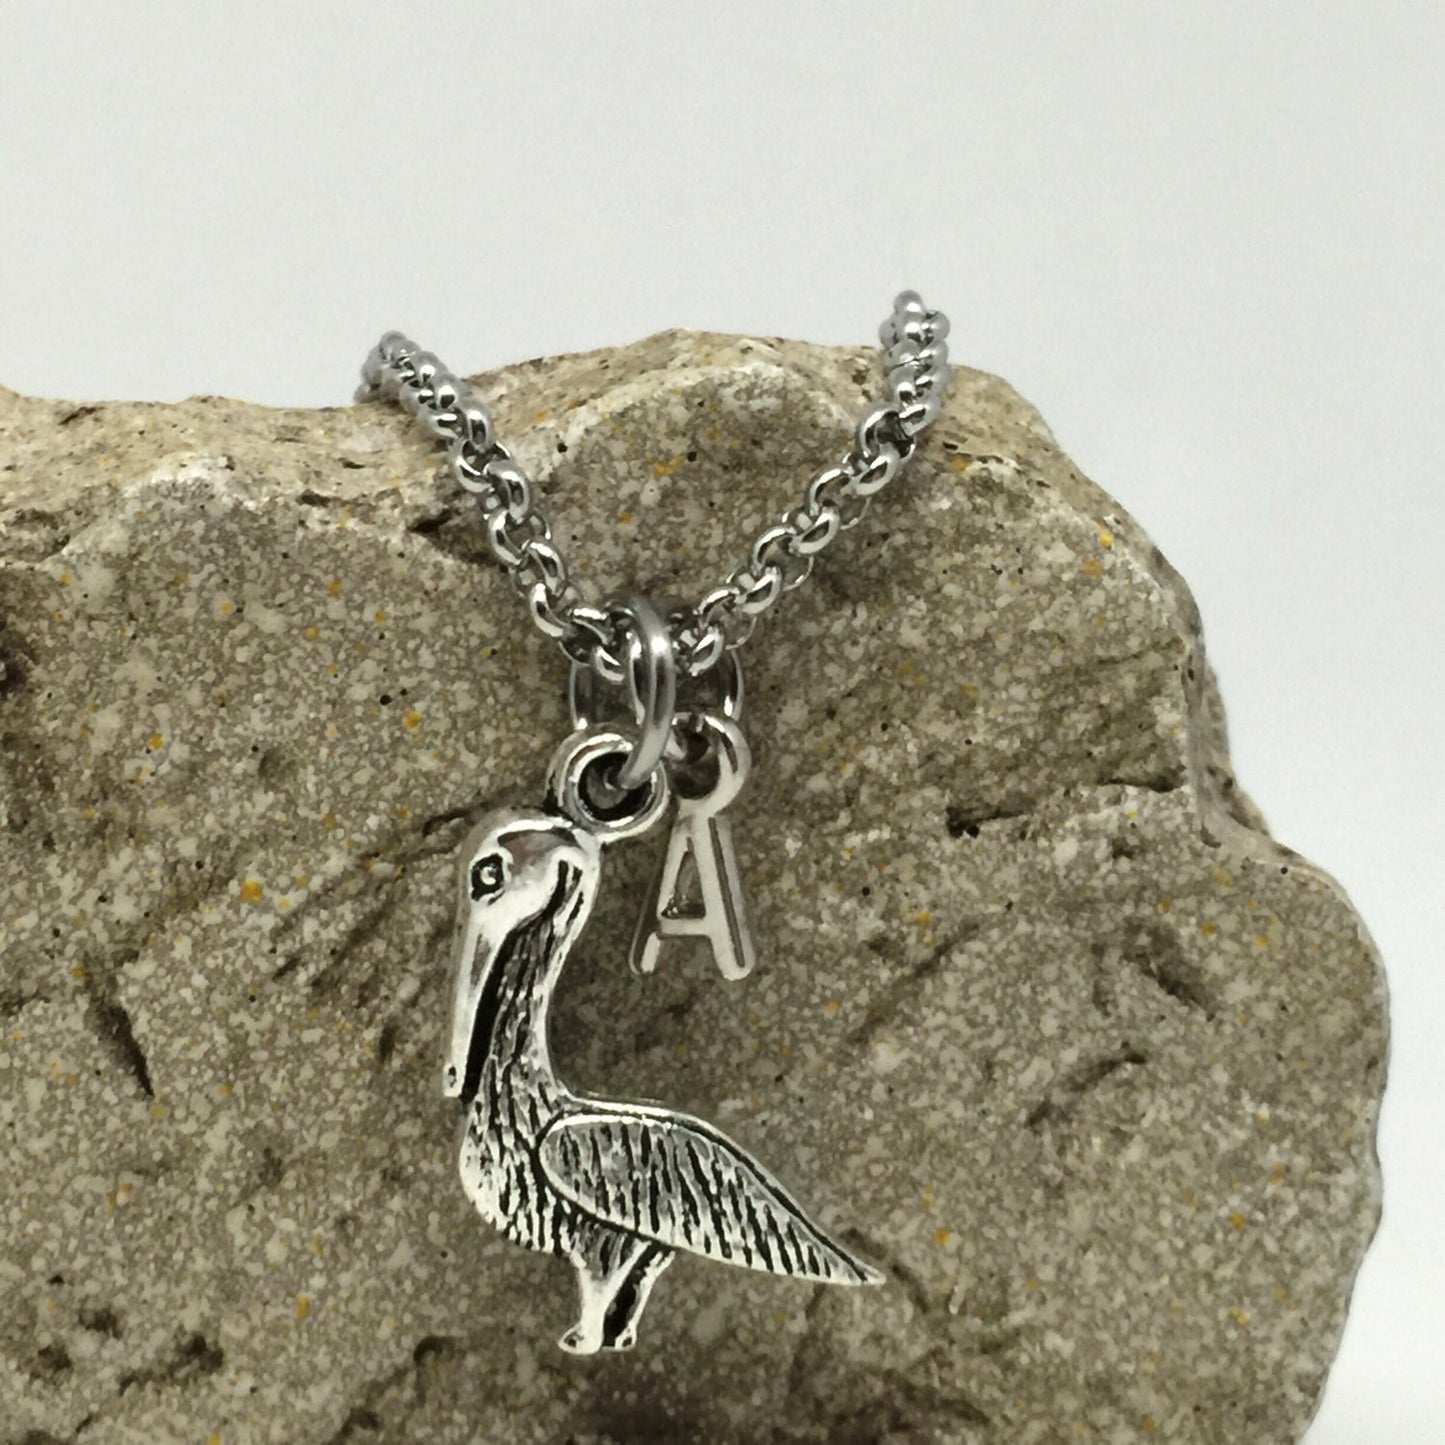 Pelican charm necklace stainless steel sterling silver initial choice save our seas